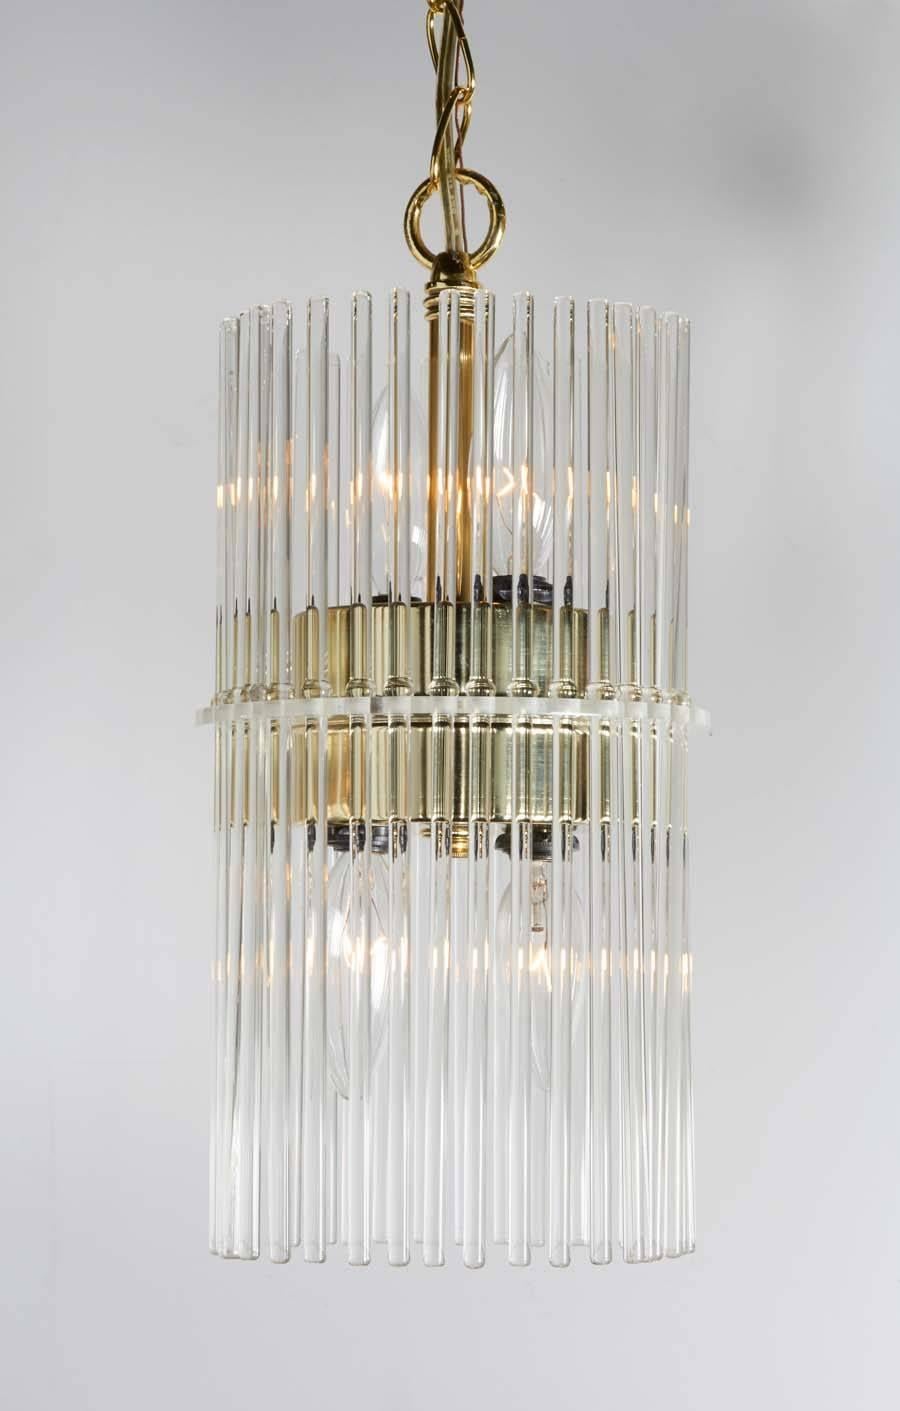 20th Century Pair of Mid-Century Modern Glass Rod Pendant Chandeliers by Lightolier